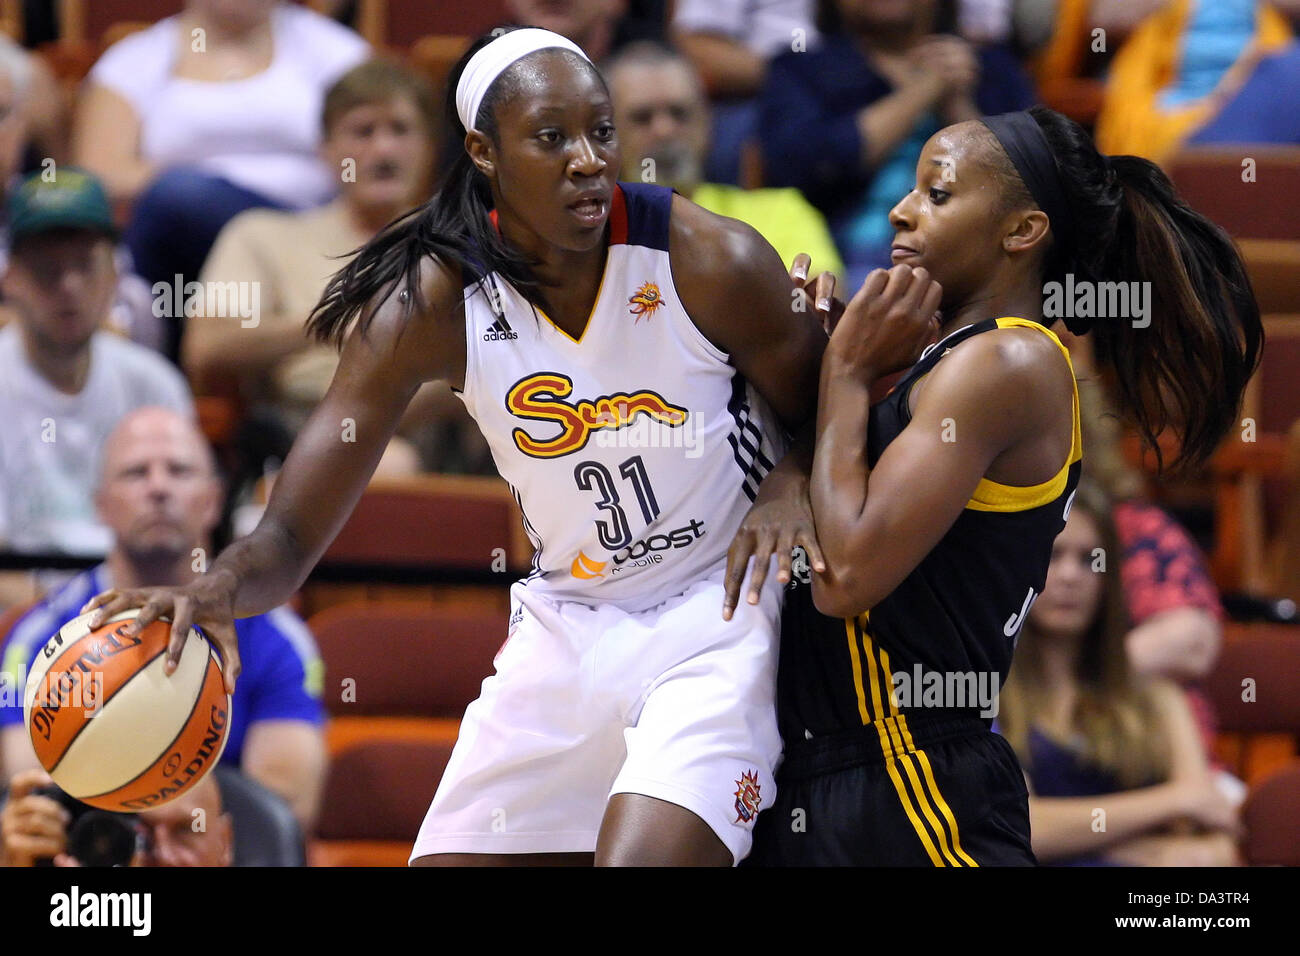 July 2, 2013 - Uncasville, Connecticut, United States - Connecticut Sun center Tina Charles (31) backs down Tulsa Shock forward Glory Johnson (25) on the post during the WNBA basketball game between the Connecticut Sun and Tulsa Shock at Mohegan Sun Arena. Connecticut defeated Tulsa 88-69. Anthony Nesmith/CSM Stock Photo